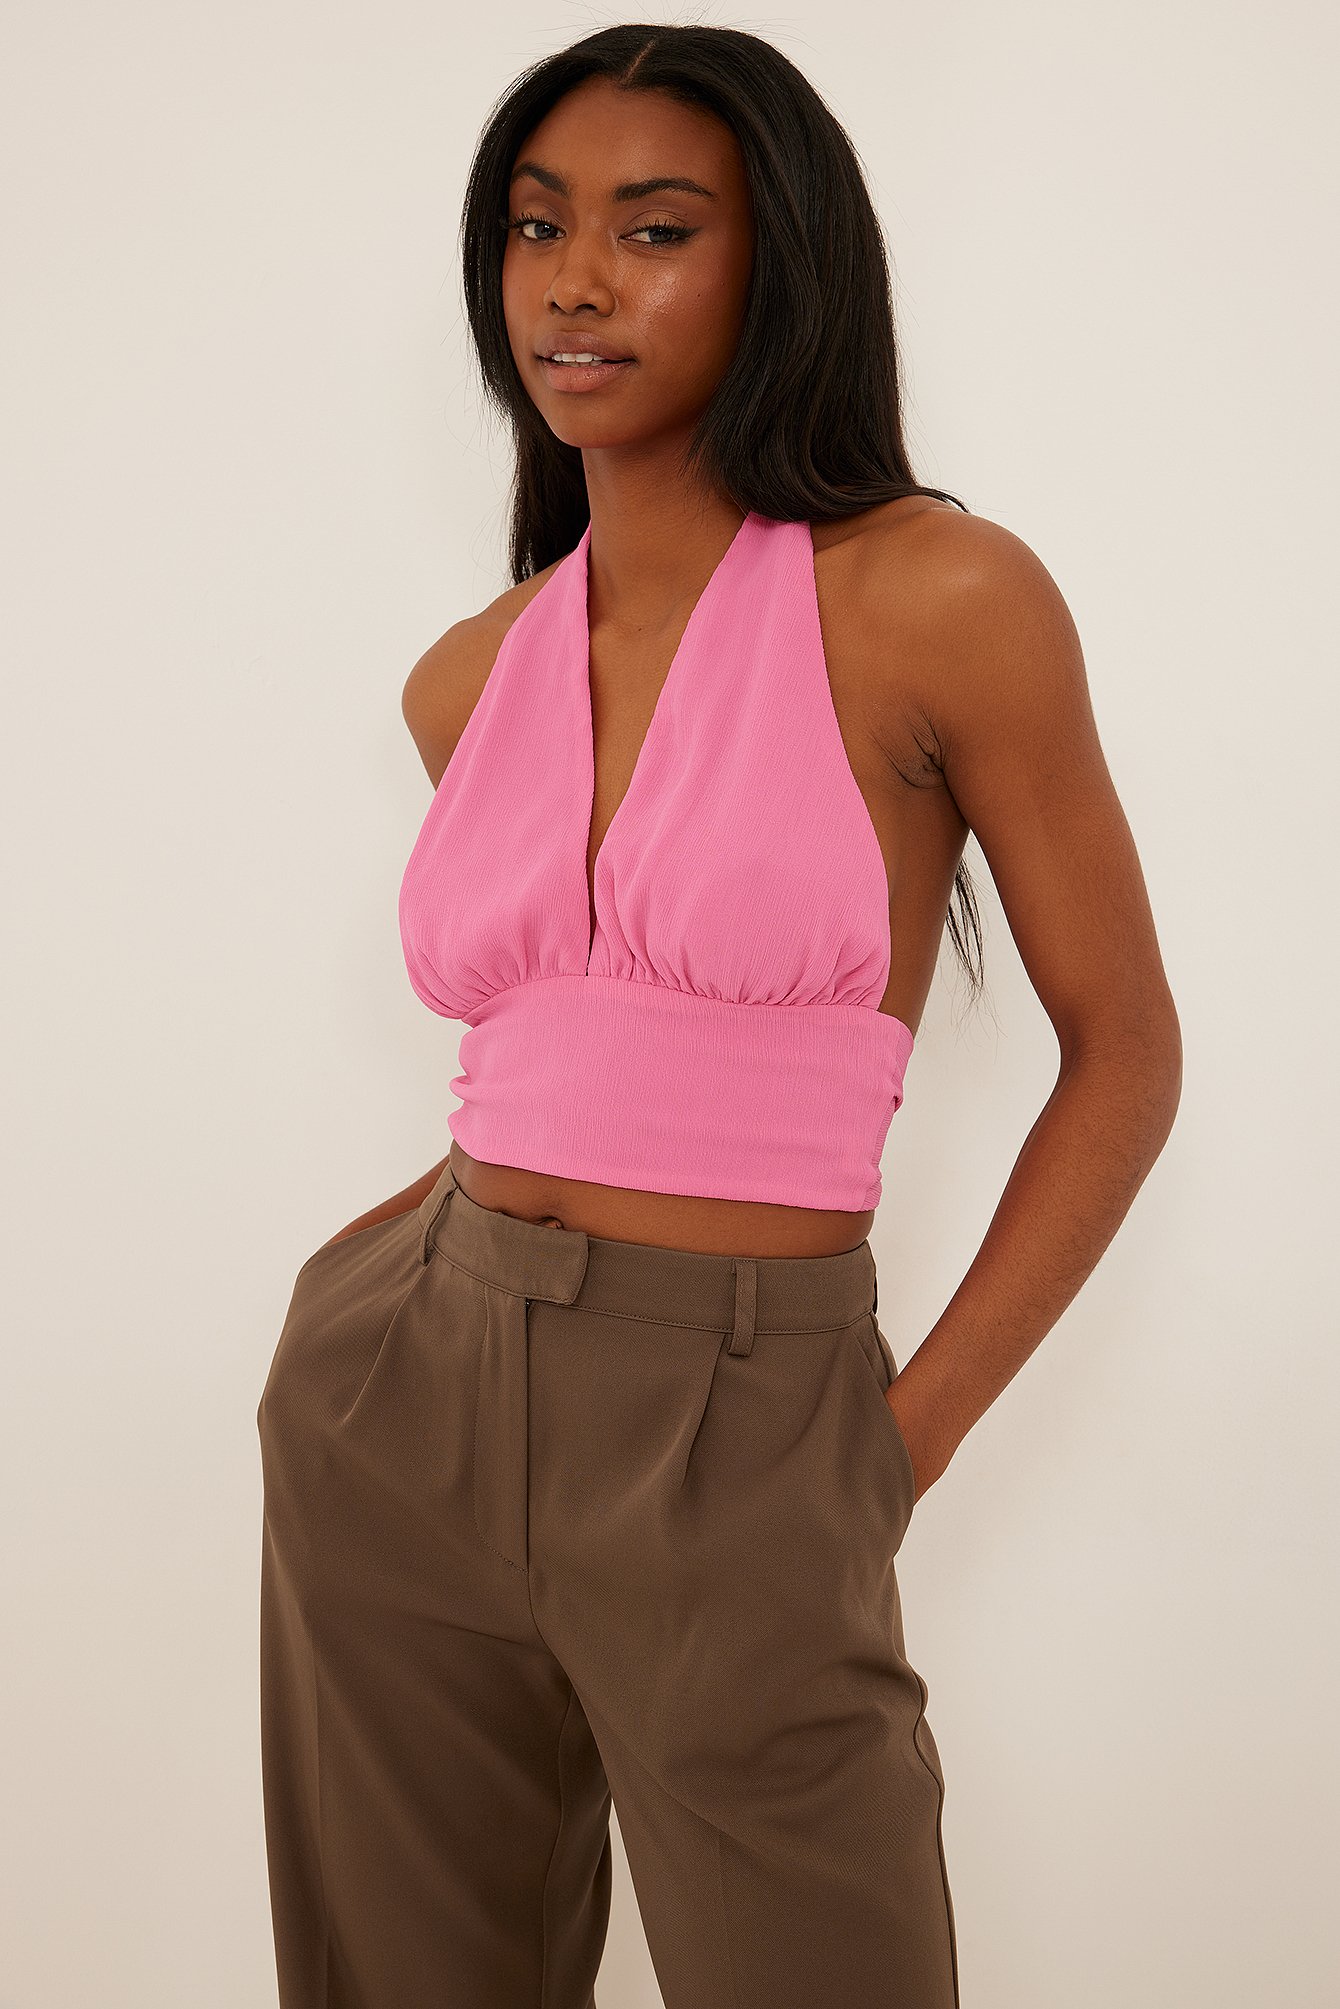 Lace Up Halter Neck Crop Top And Ruched Leggings Set - Pink – Dolls Kill